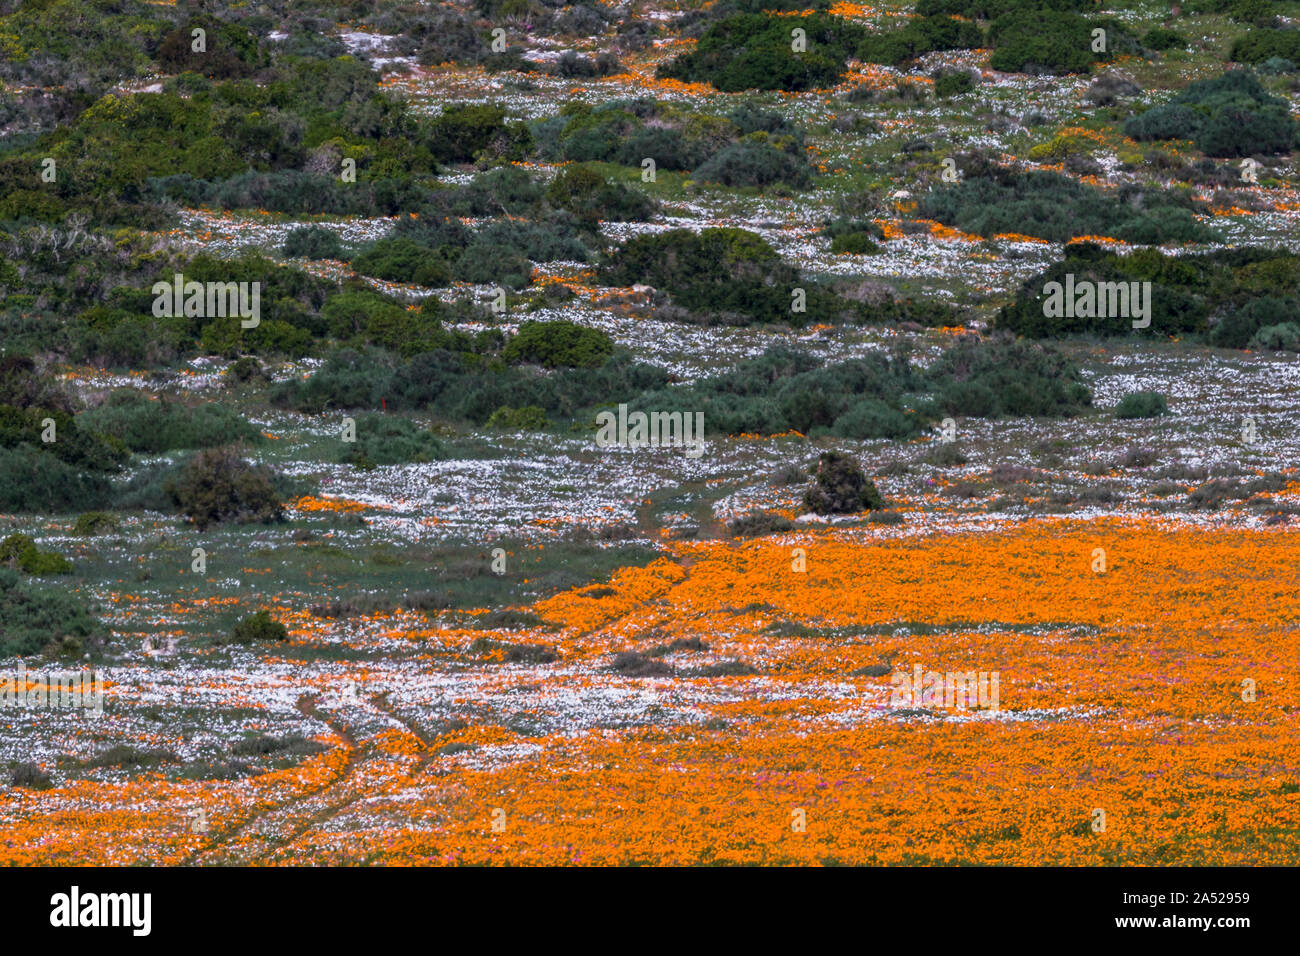 Spring flower carpets, Postberg section, West Coast National Patk, South Africa Stock Photo